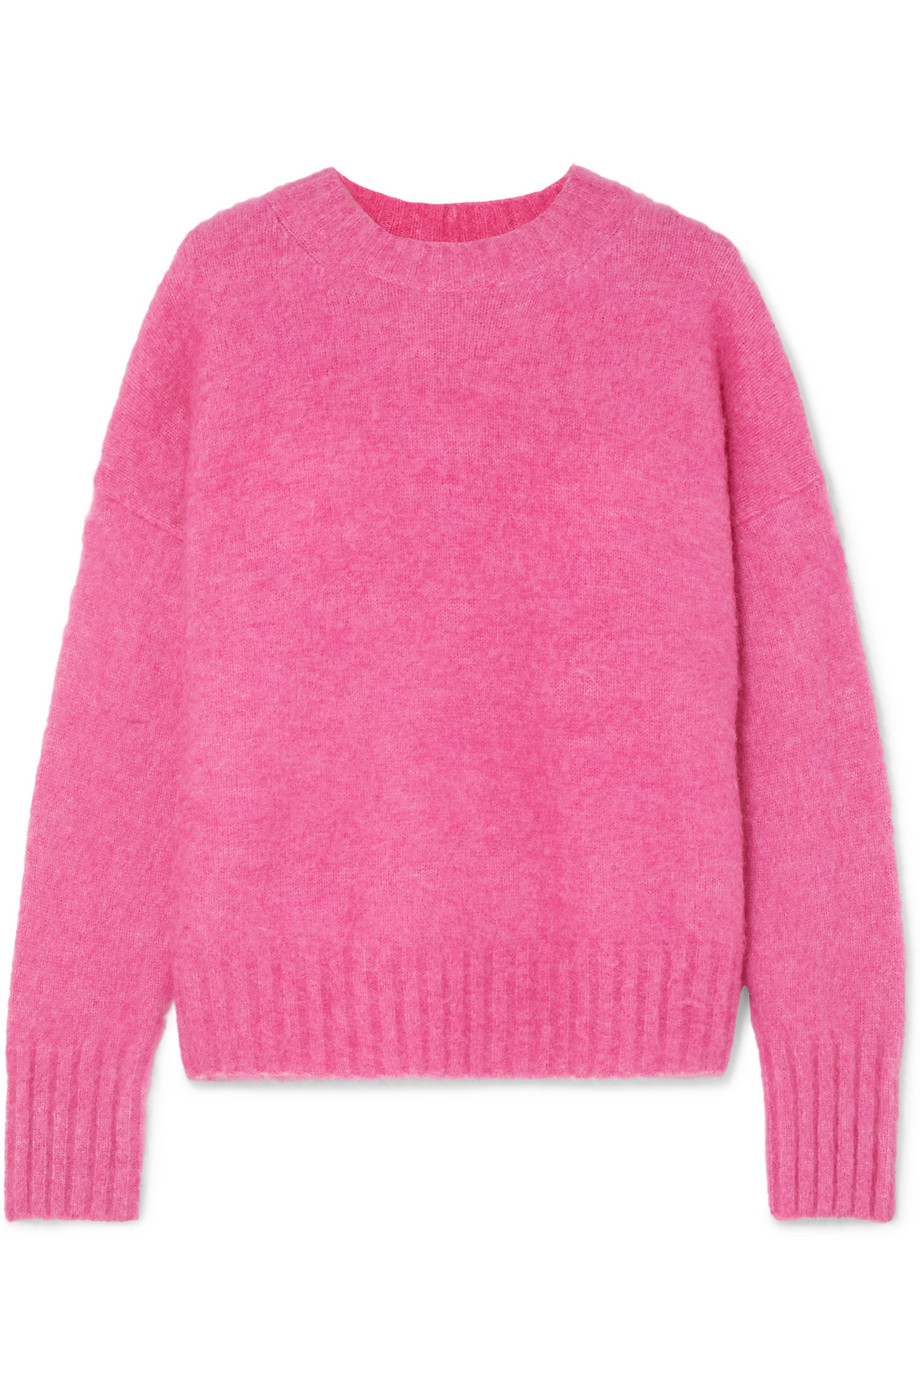 Hot Pink Knitted Alpaca Sweater Helmut Lang